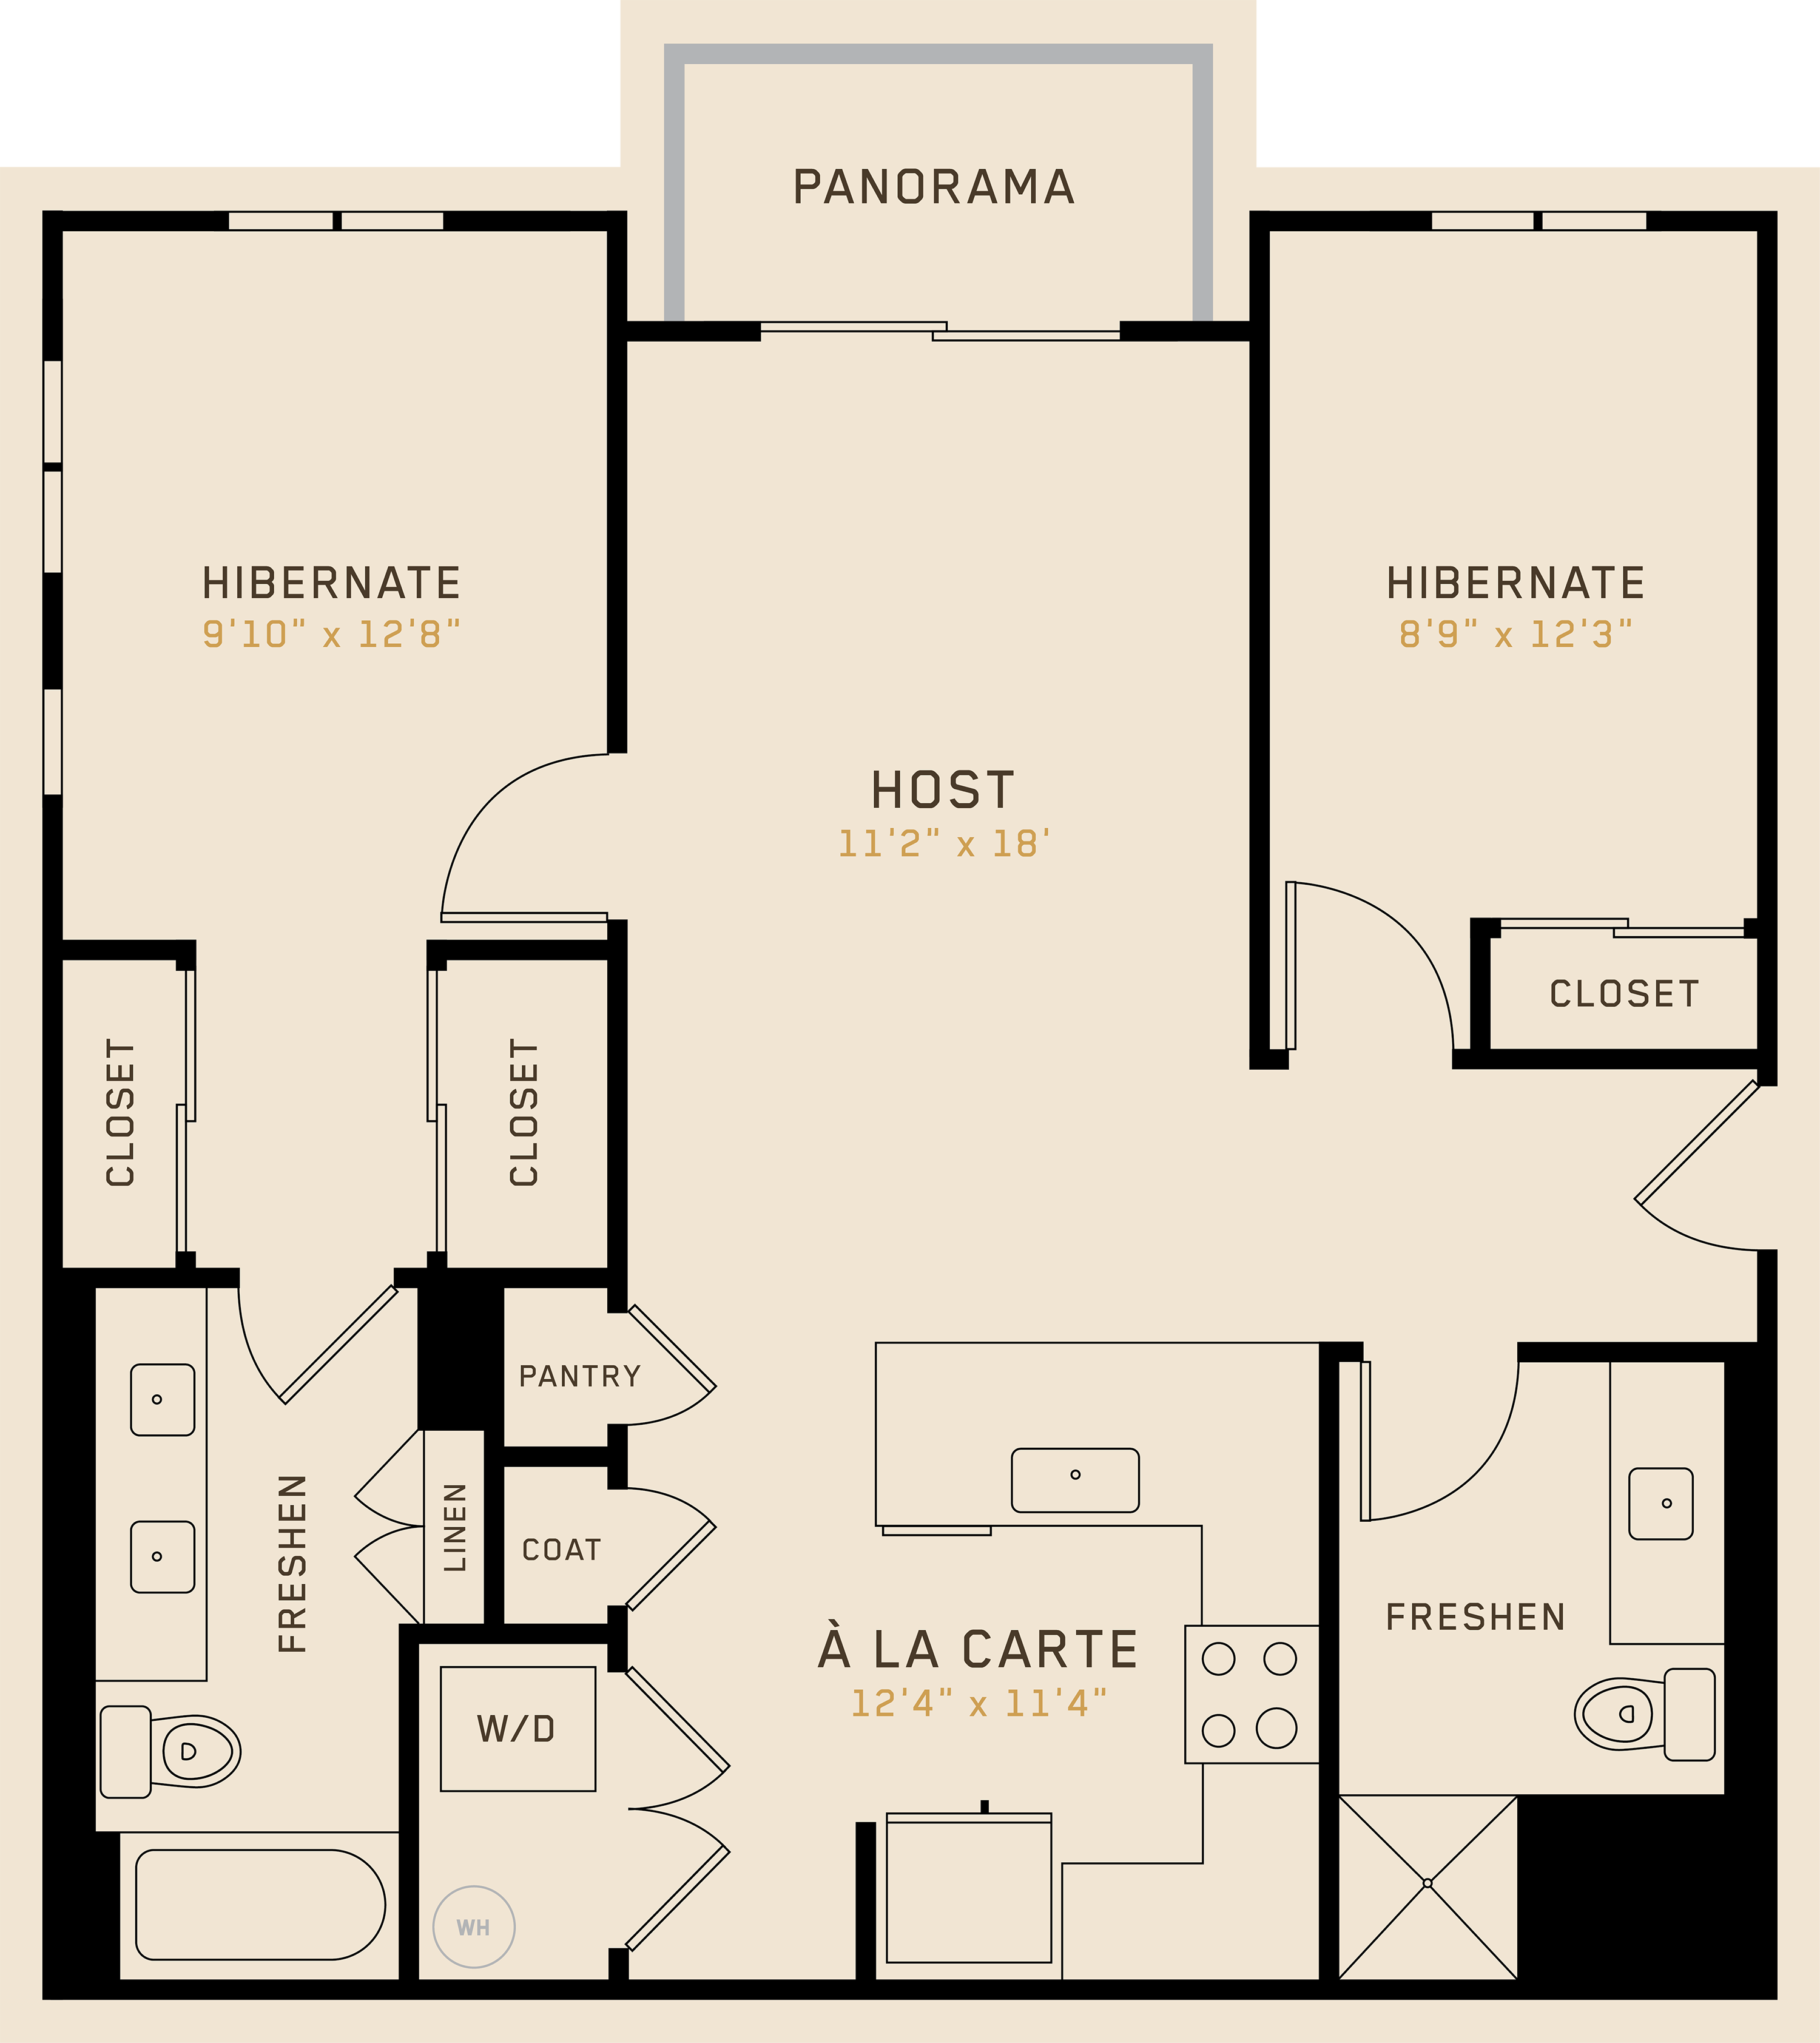 B2F floor plan featuring 2 bedrooms, 2 bathrooms, and is 985 square feet